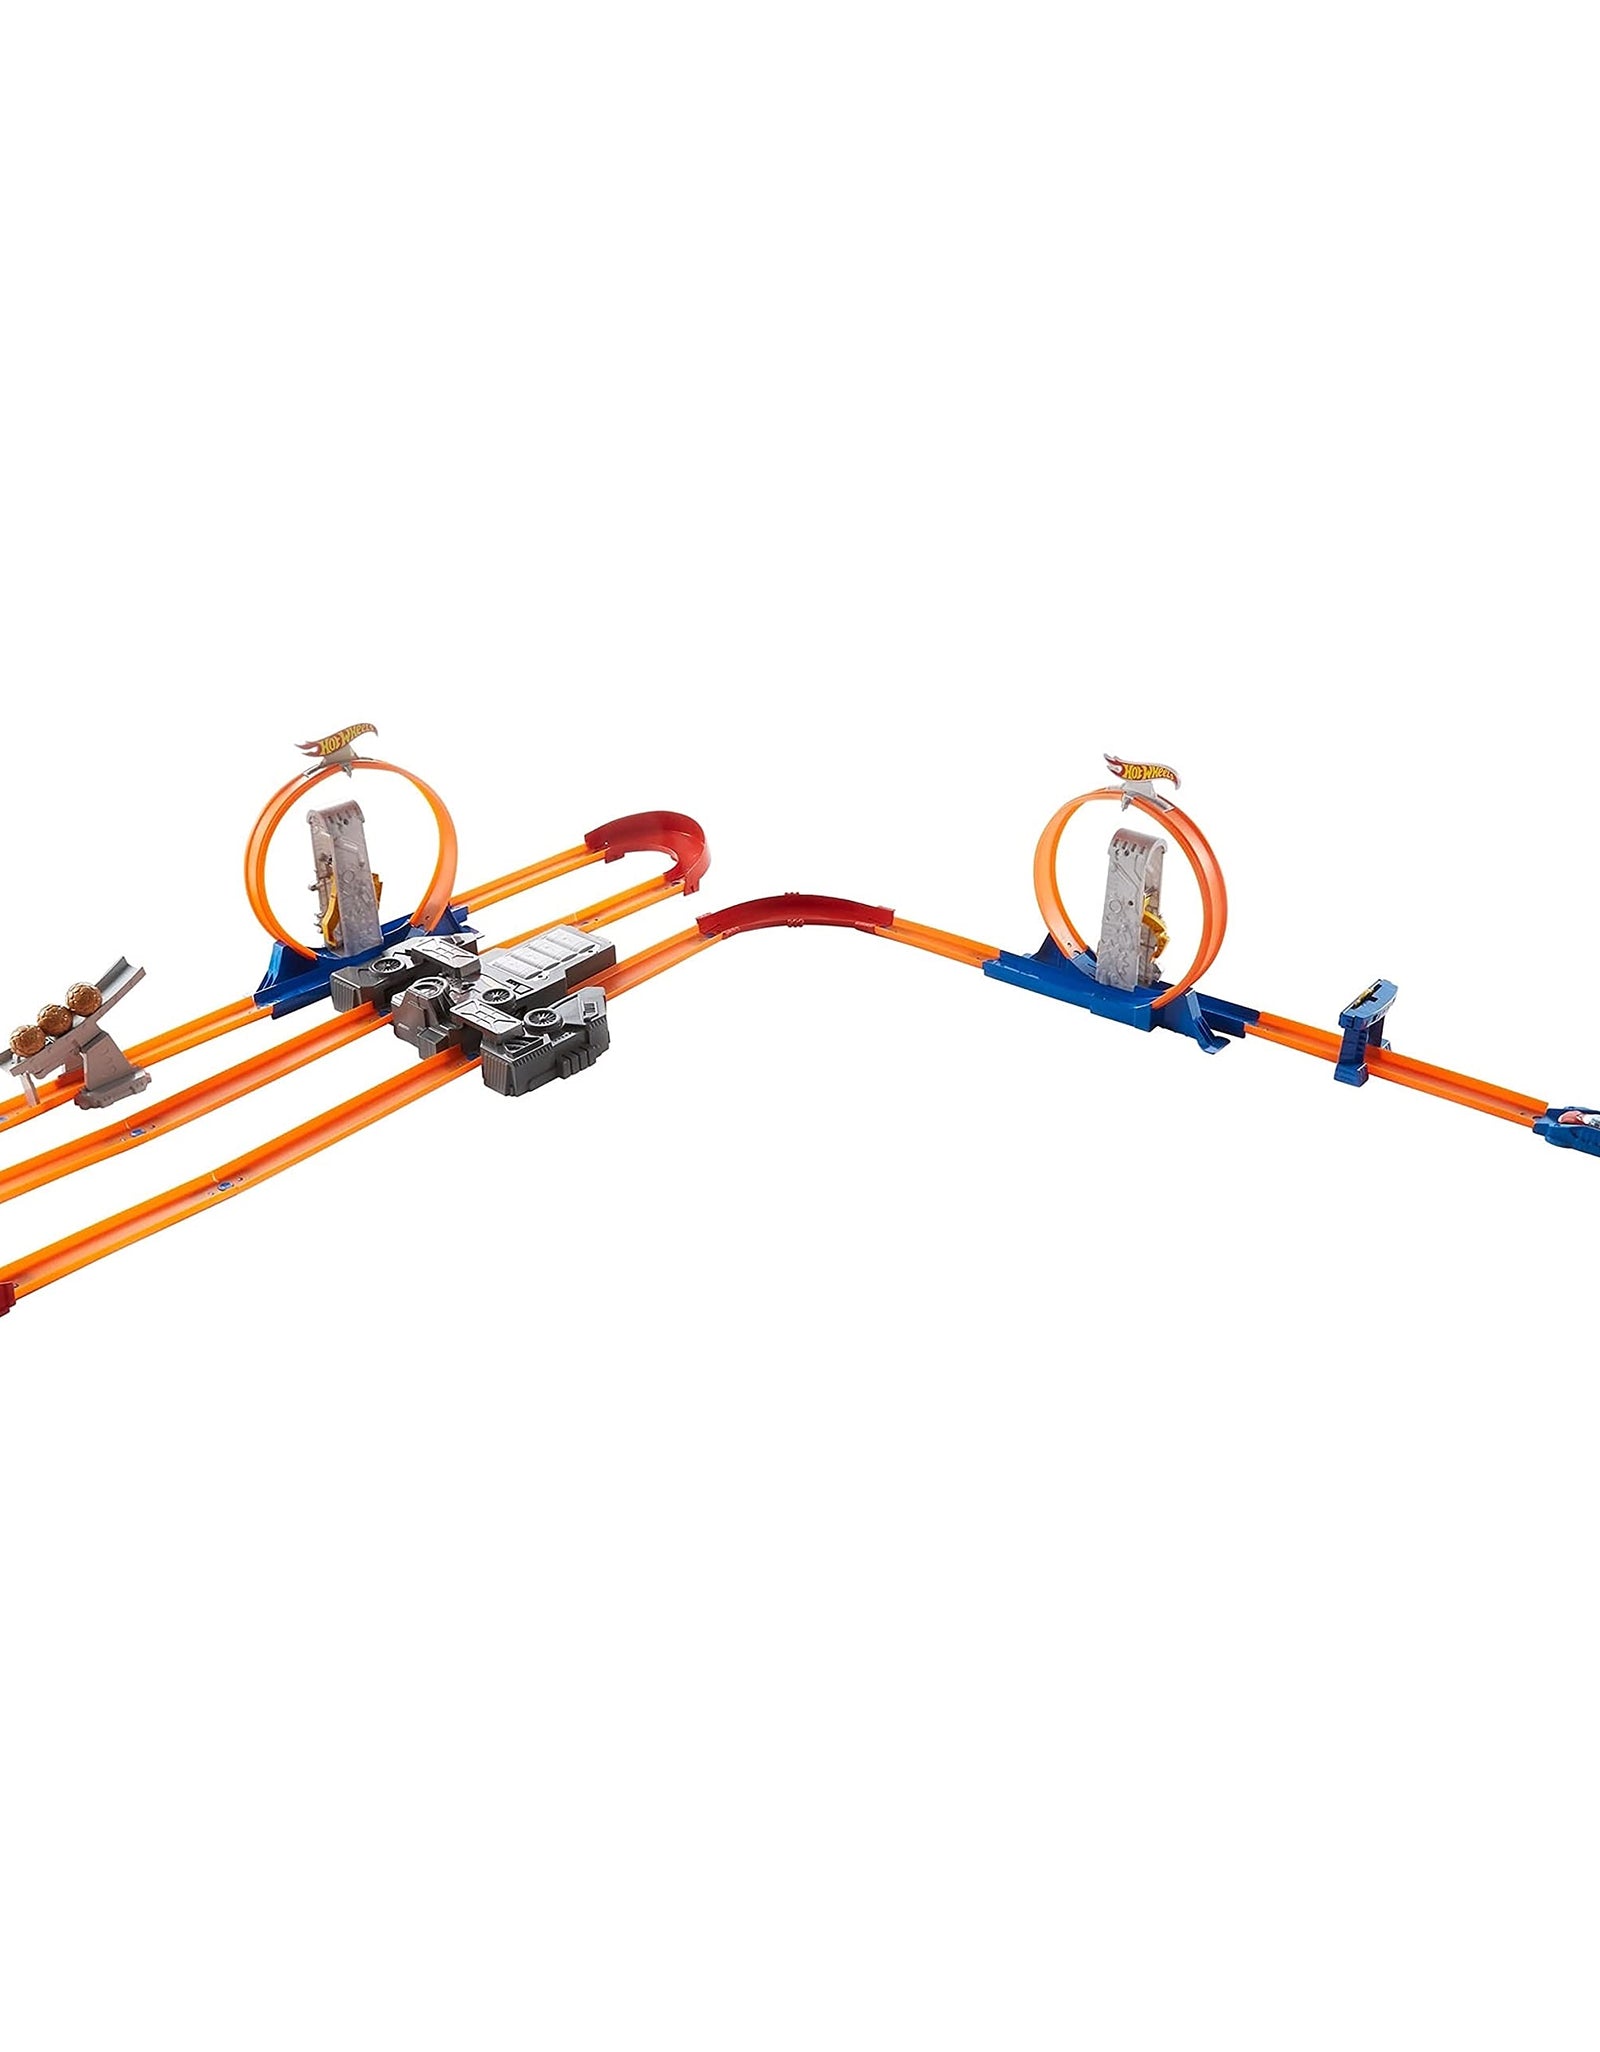 Hot Wheels Track Builder Total Turbo Takeover Track Set [Amazon Exclusive]